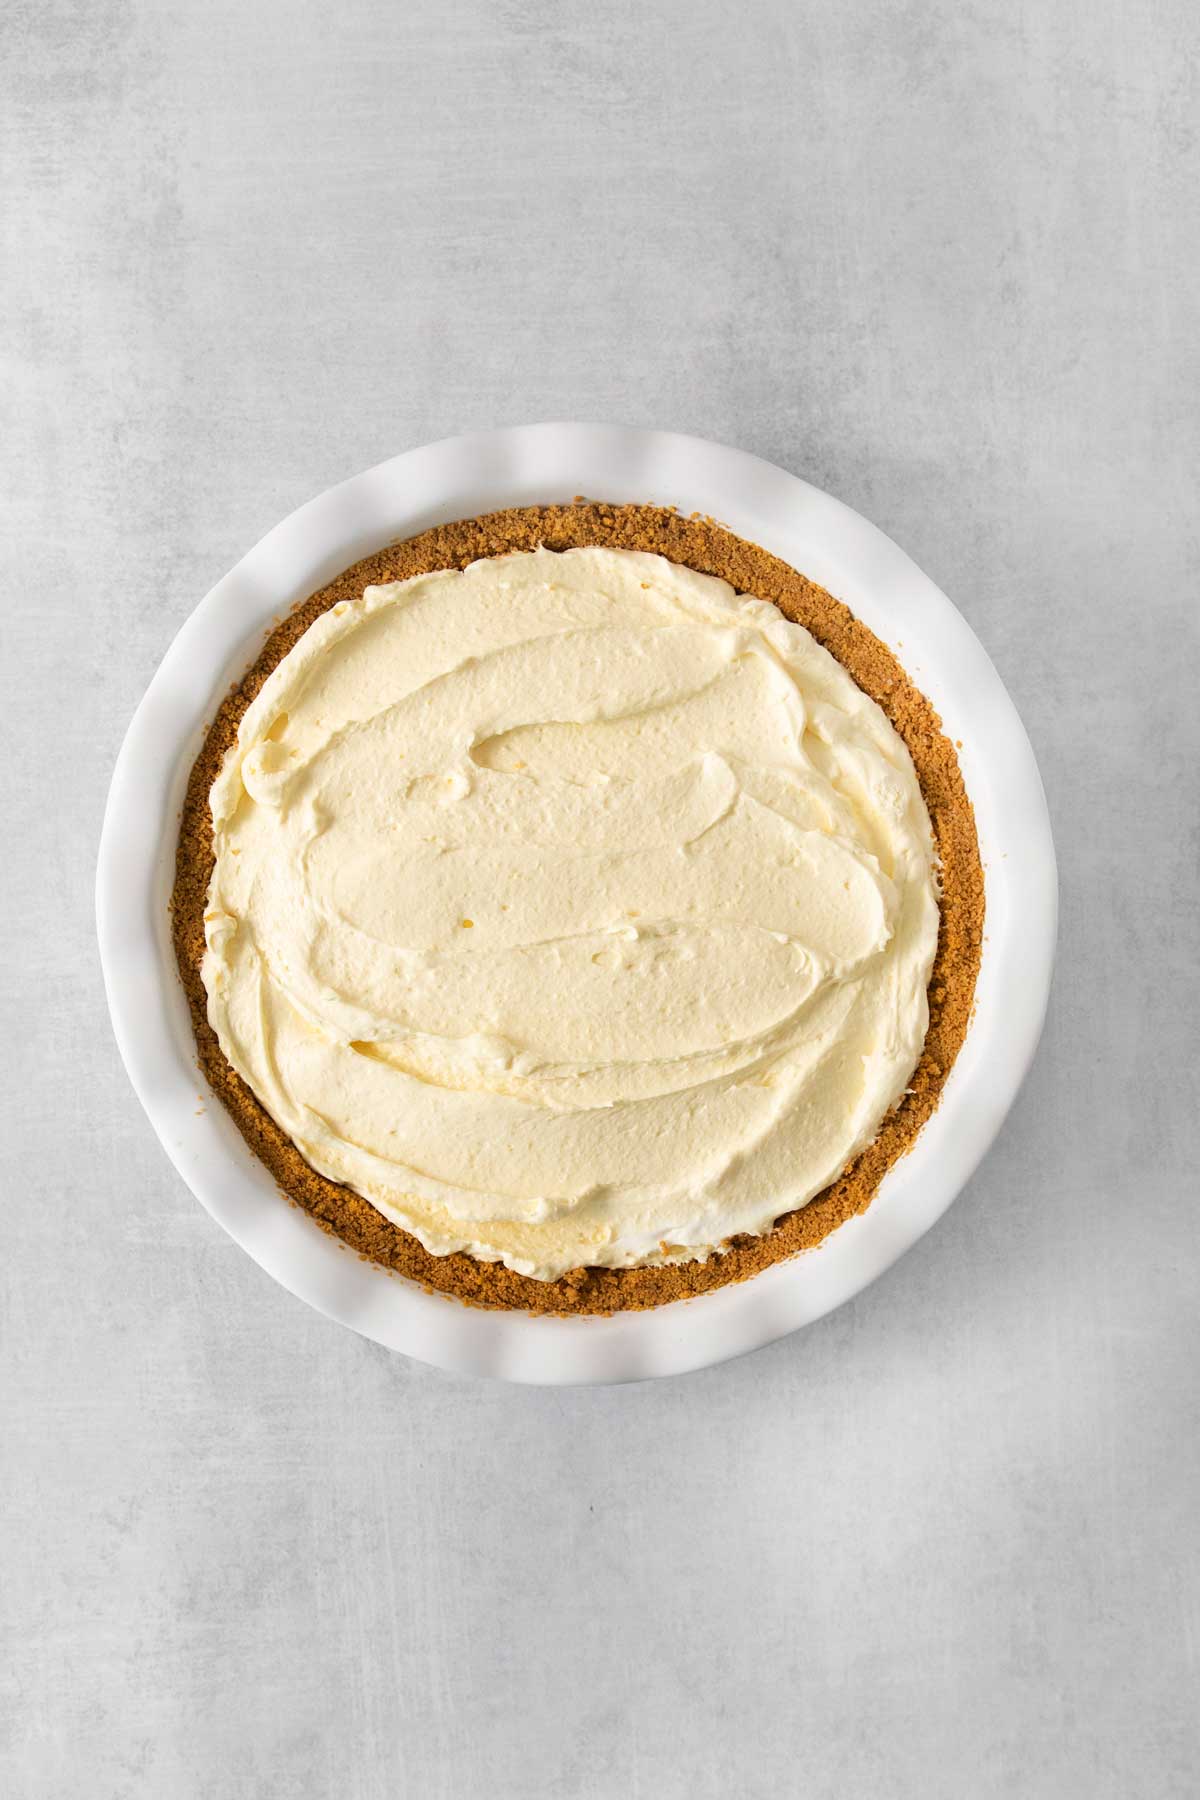 Next step is to making the perfect Banana Pudding Pie is to add the whipped cream.